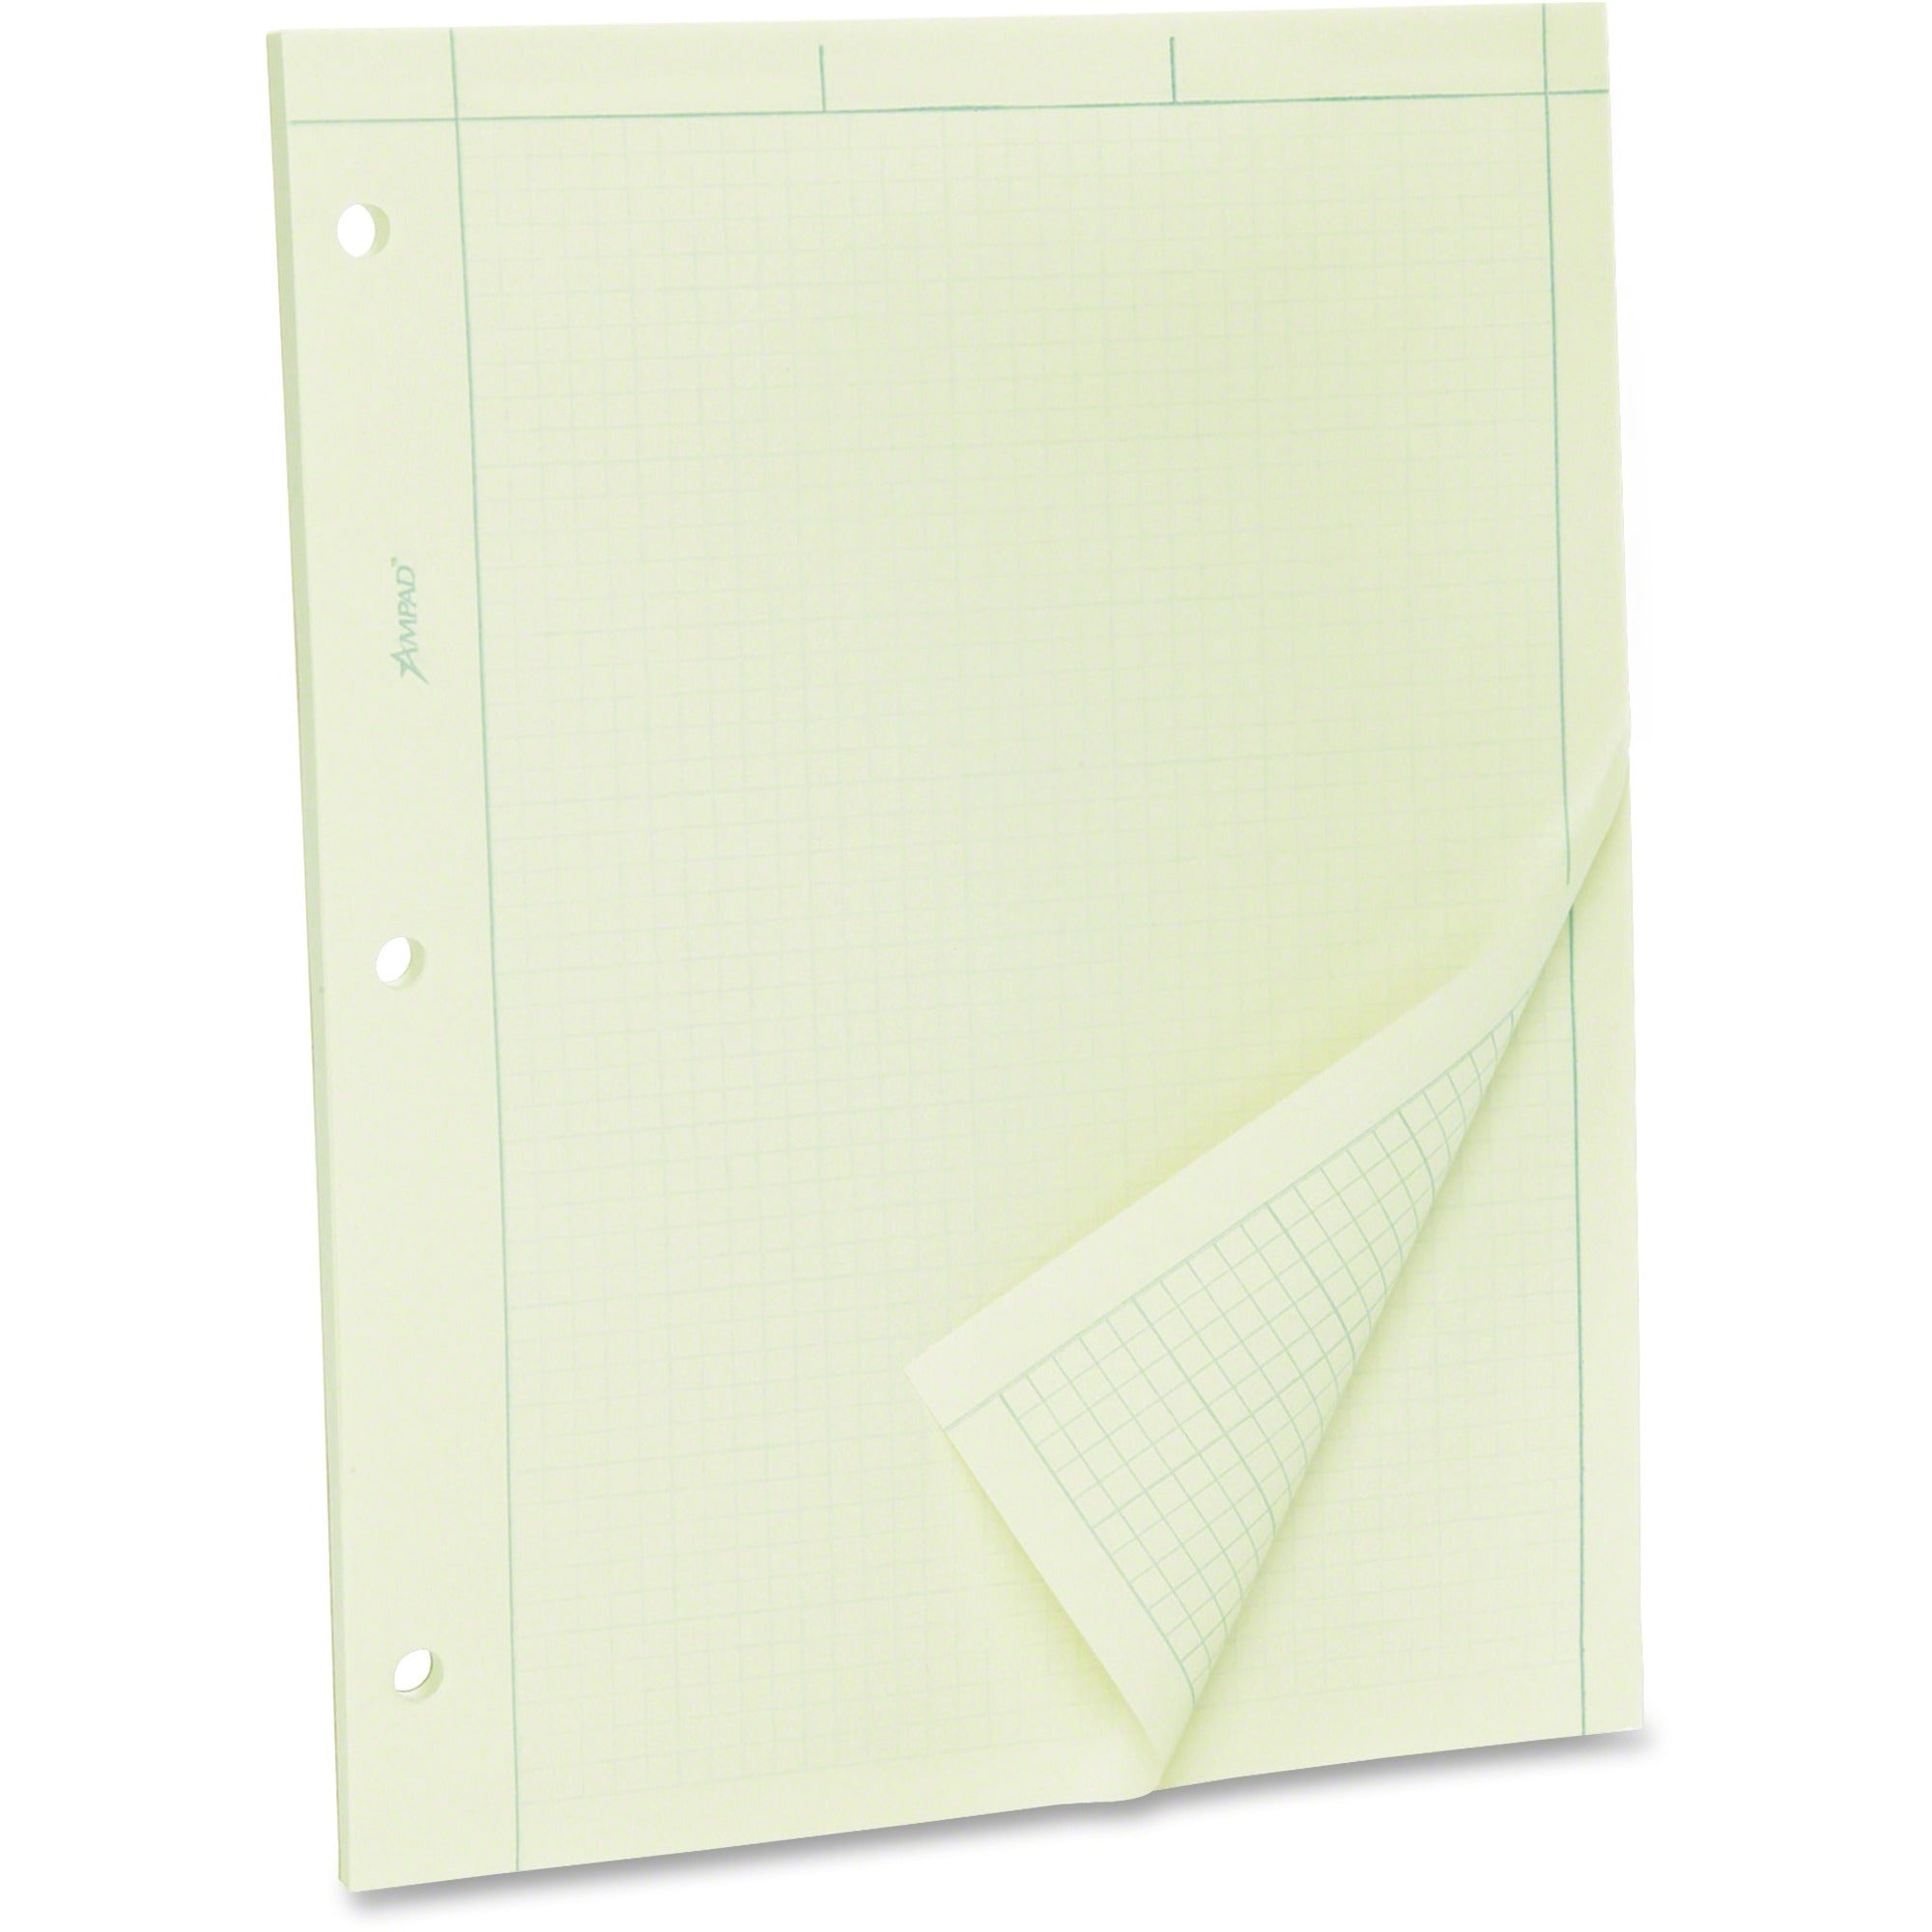 TOPS Engineering Computation Pad - 100 Sheets - Both Side Ruling Surface - Ruled Margin - 15 lb Basis Weight - Letter - 8 1/2" x 11" - Green Tint Paper - Hole-punched - 1 / Pad - 